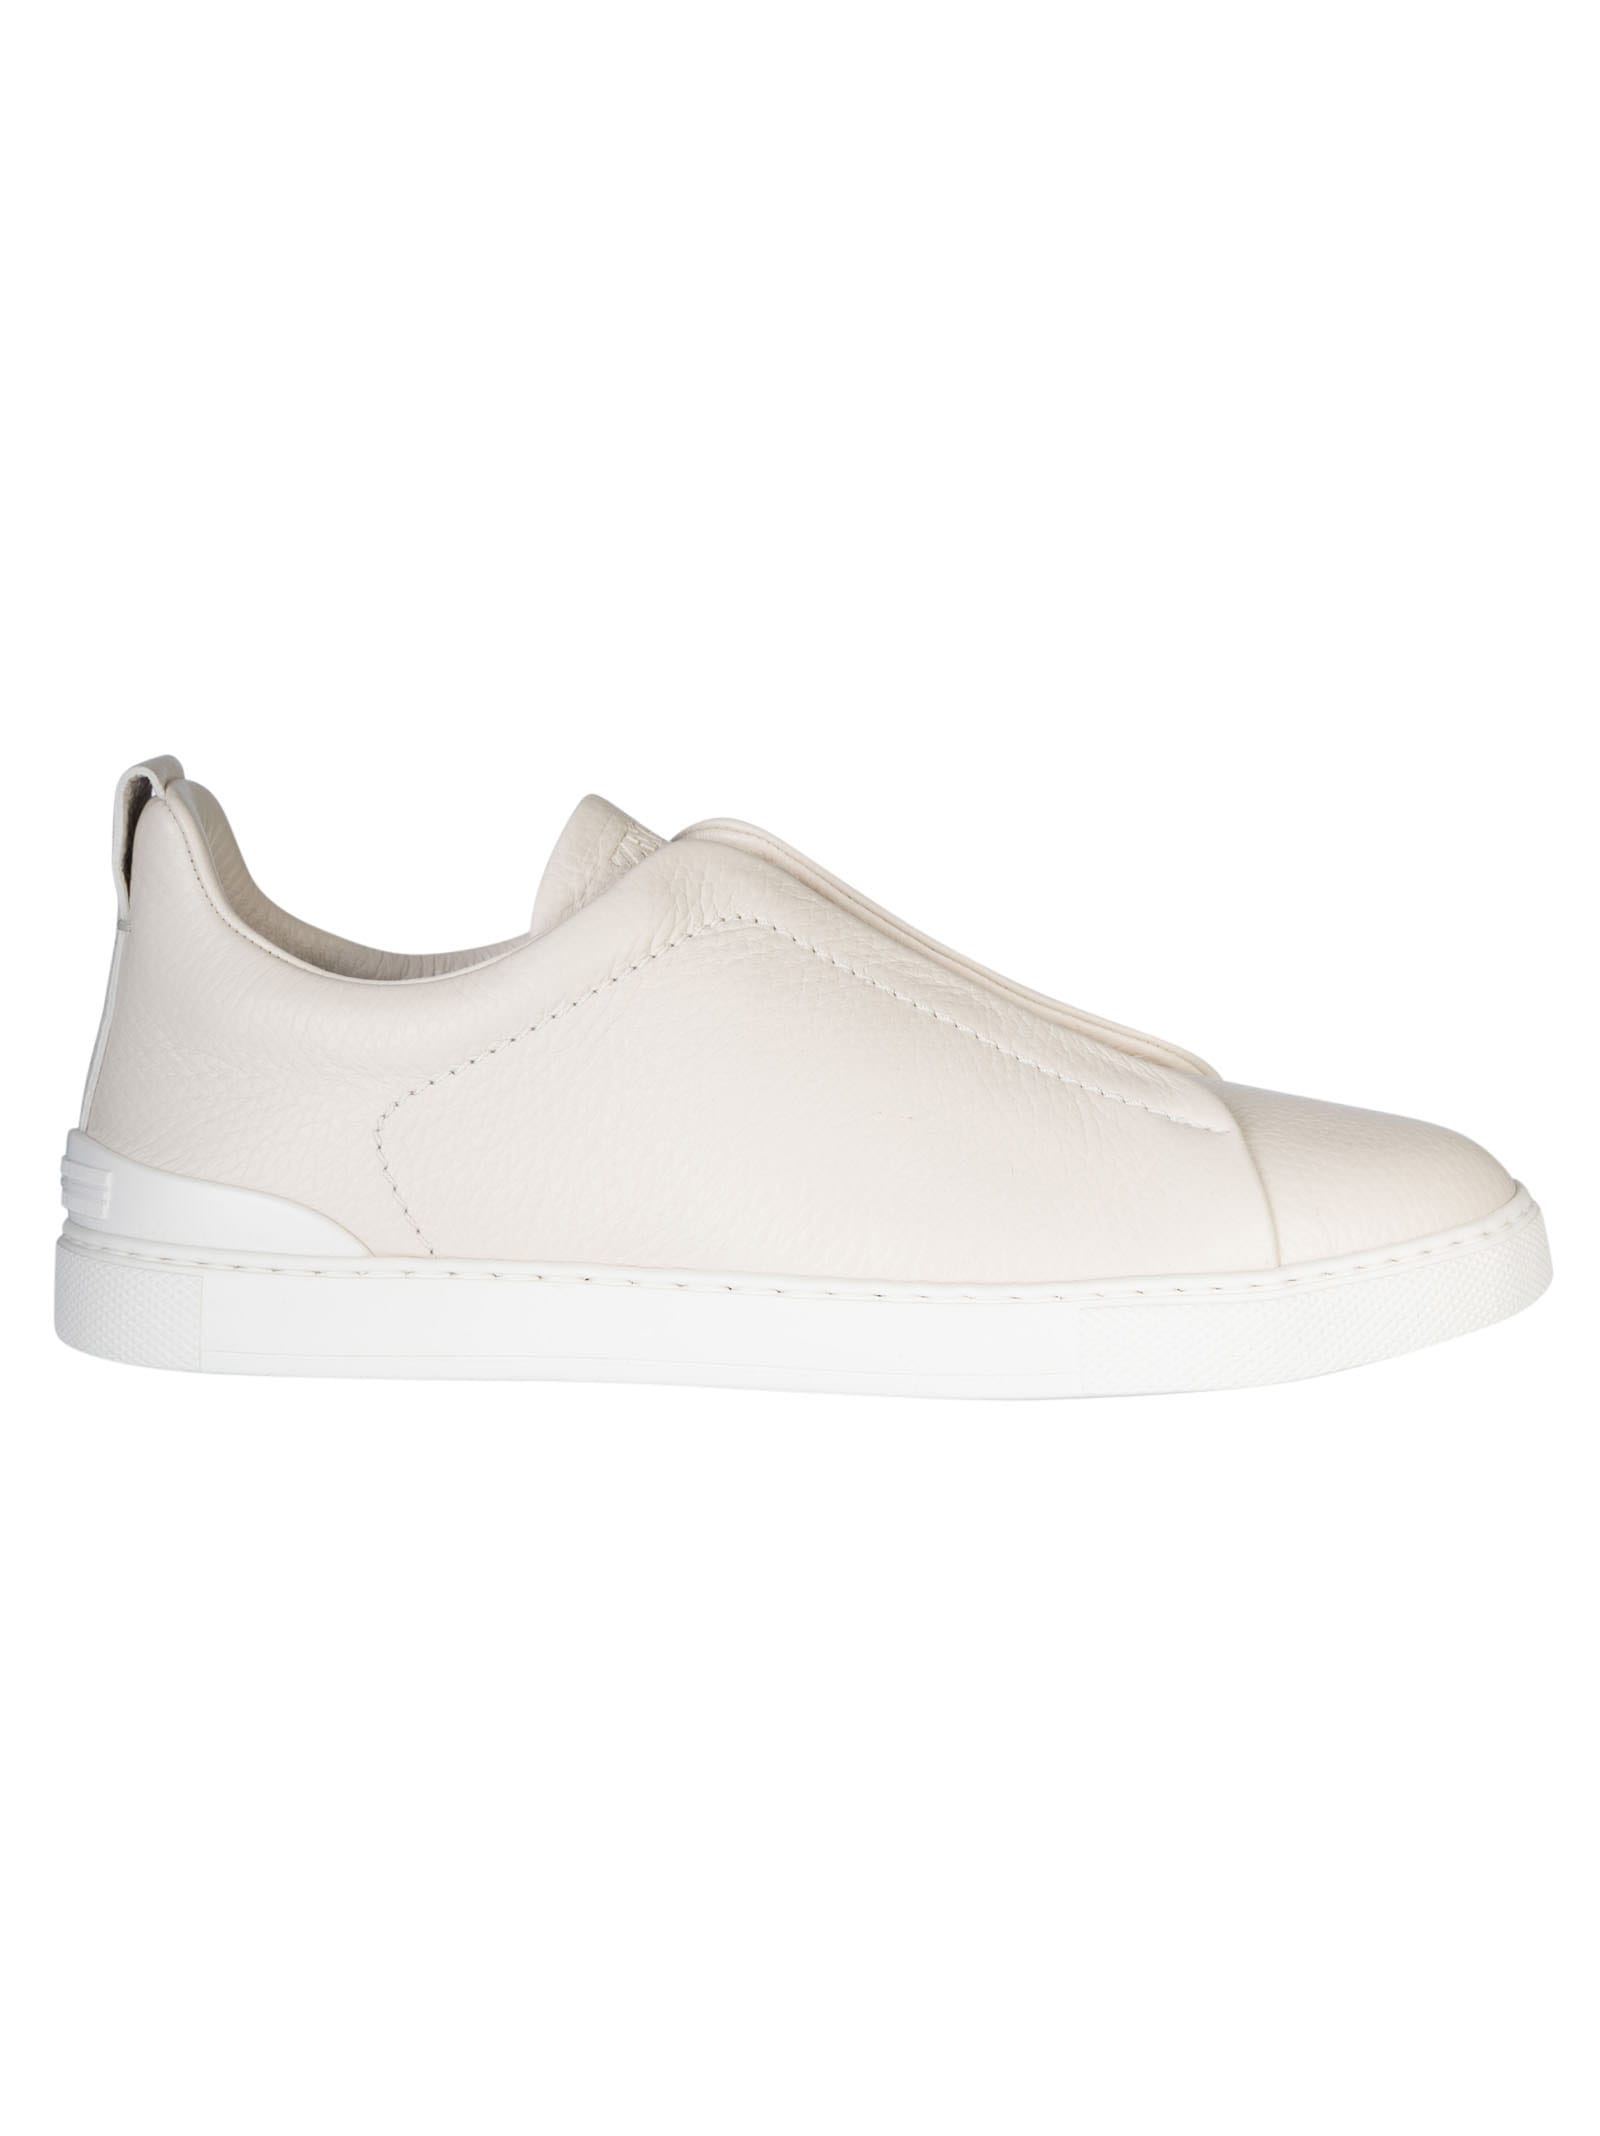 Shop Zegna Fitted Slide-on Sneakers